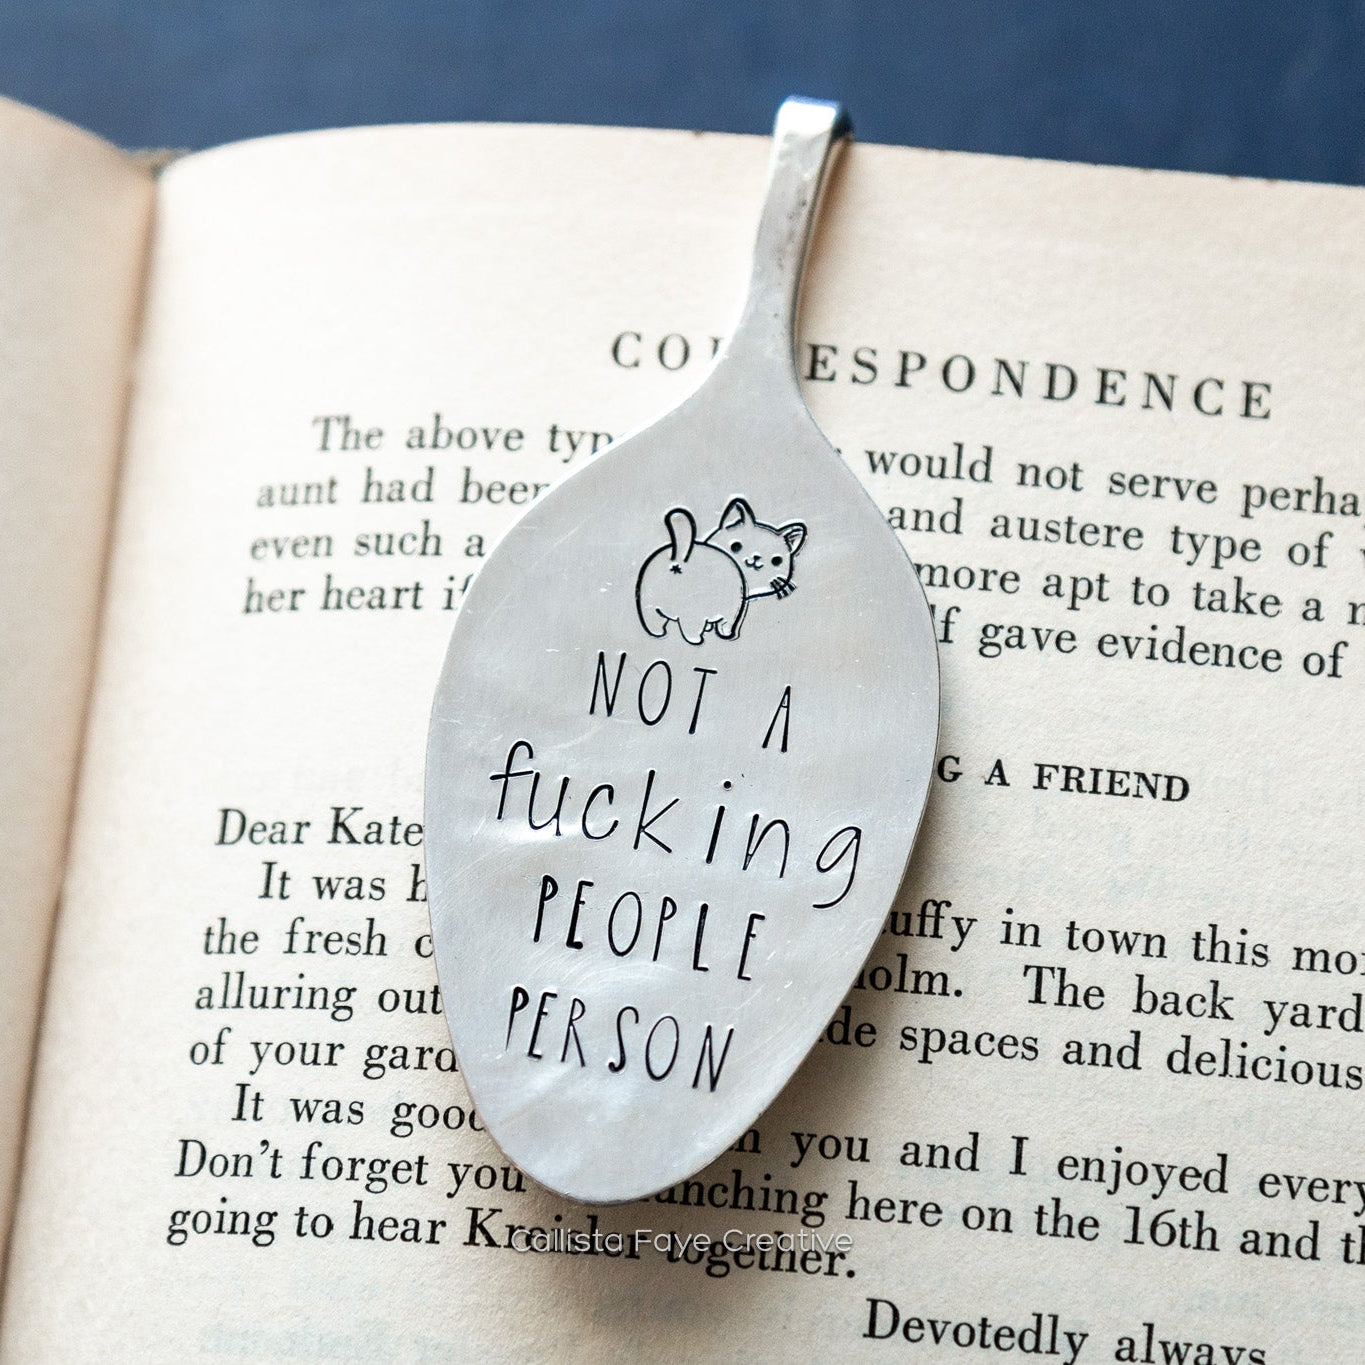 Not a Fucking People Person, Vintage Spoon Bookmark Bookmarks callistafaye   